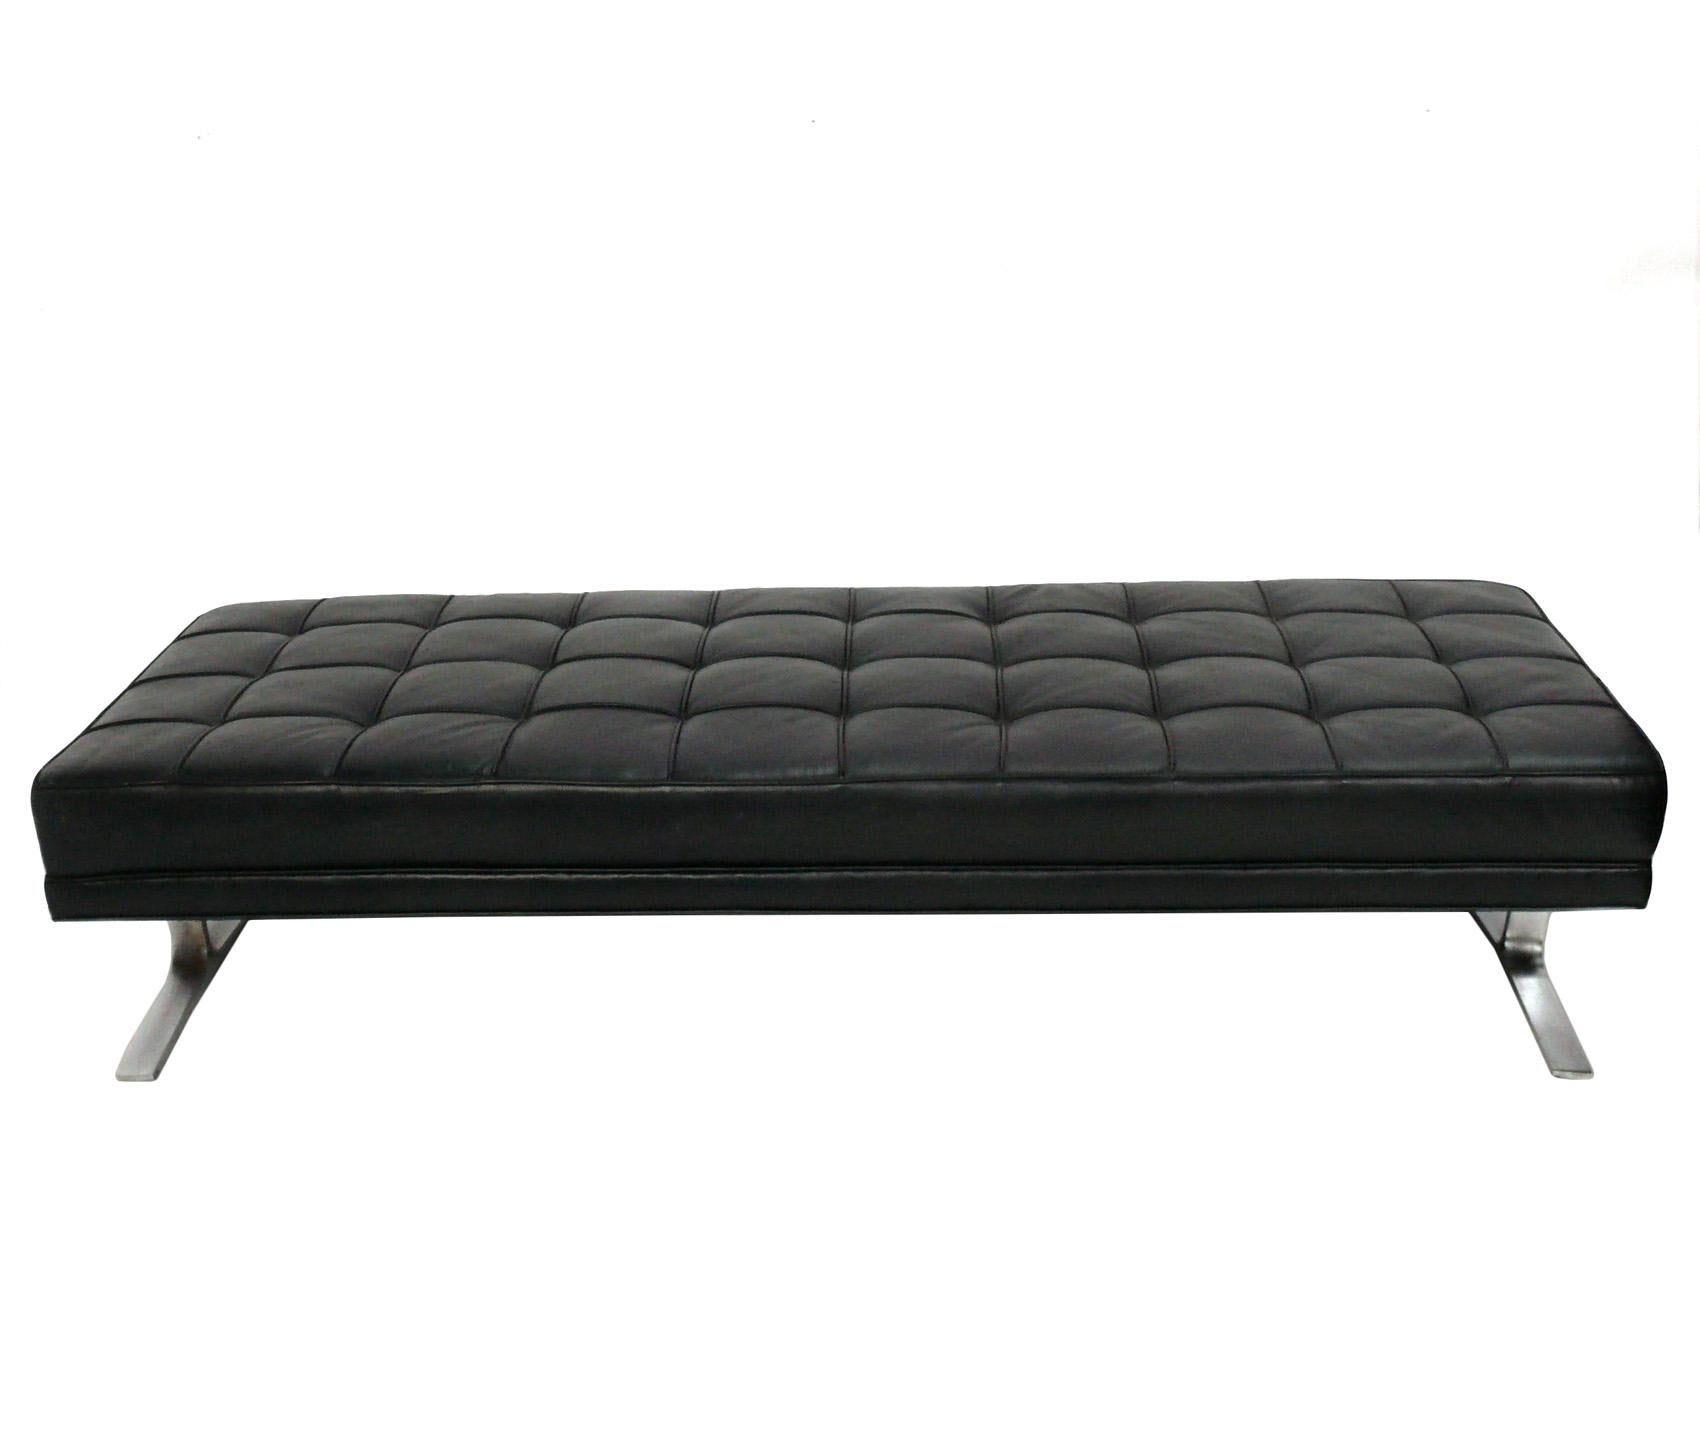 Mid-Century Modern Tufted Black Leather and Satin Chrome Leg Bench attributed to Nicos Zographos For Sale